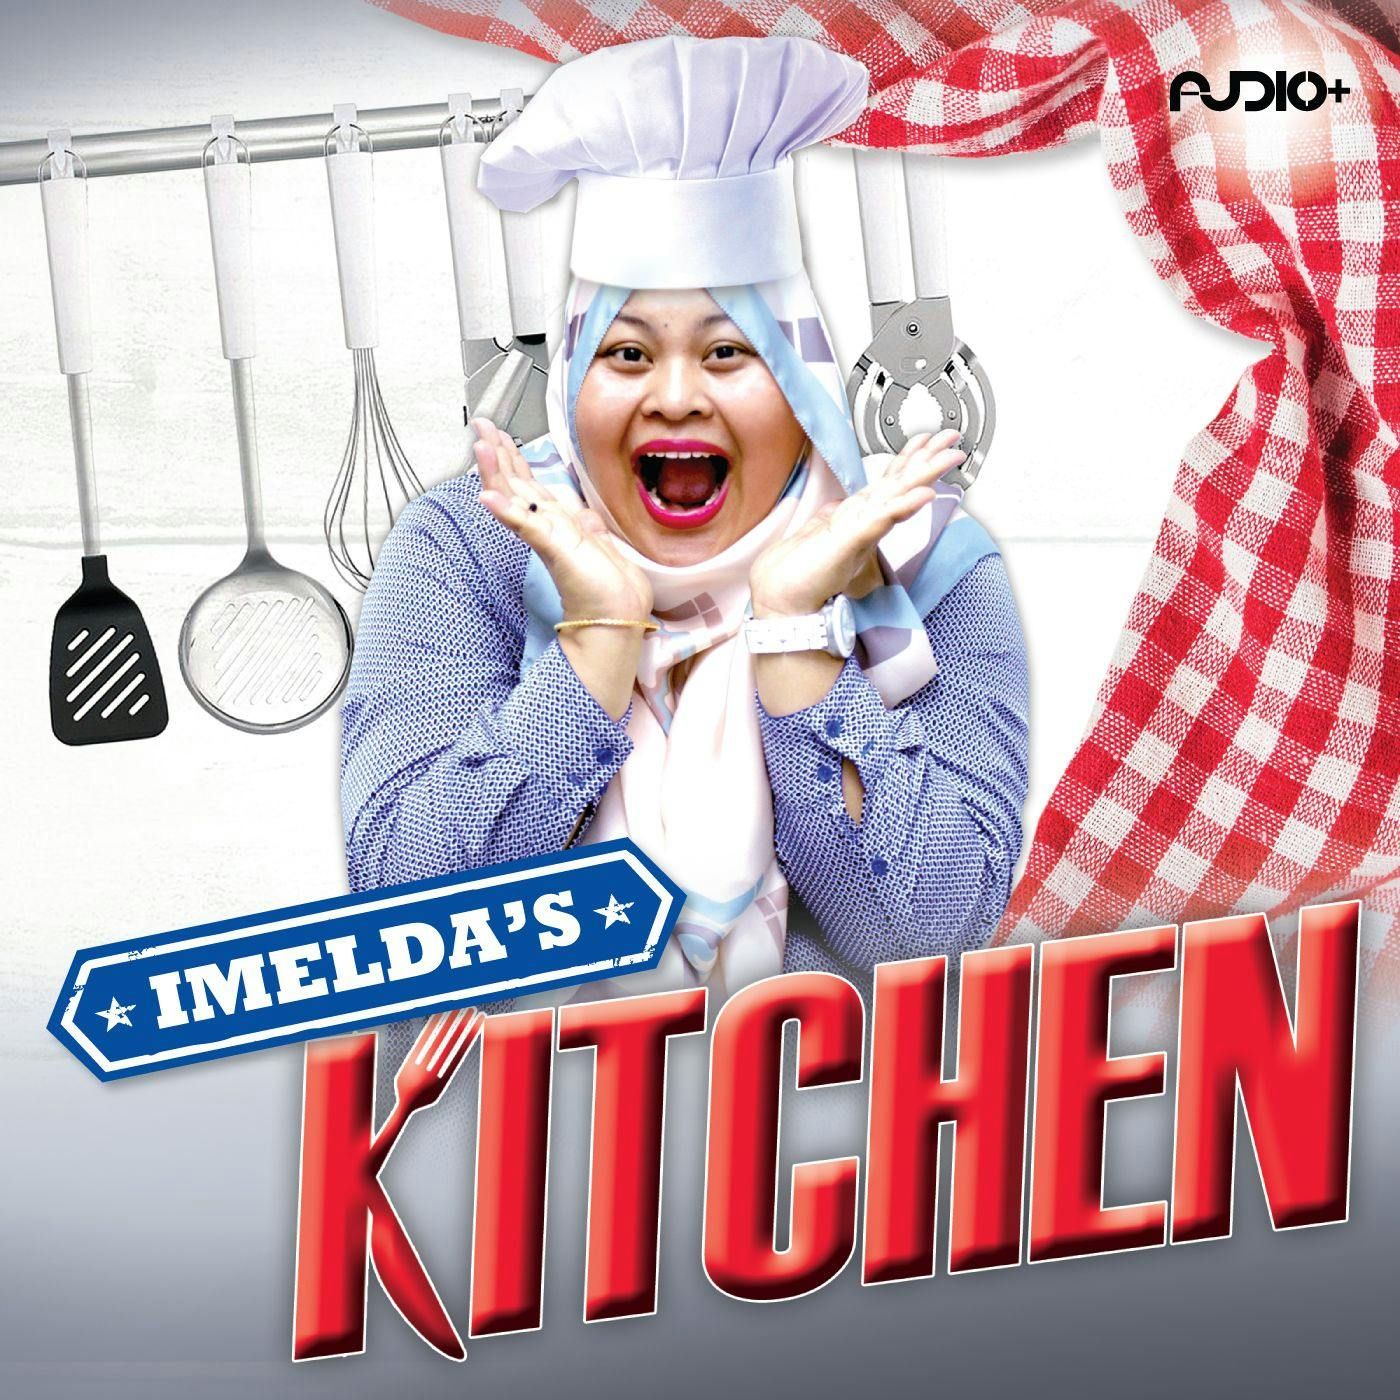 Episode 36 - All About Onions! (ft. Green Apple Luna) : Imelda's Kitchen